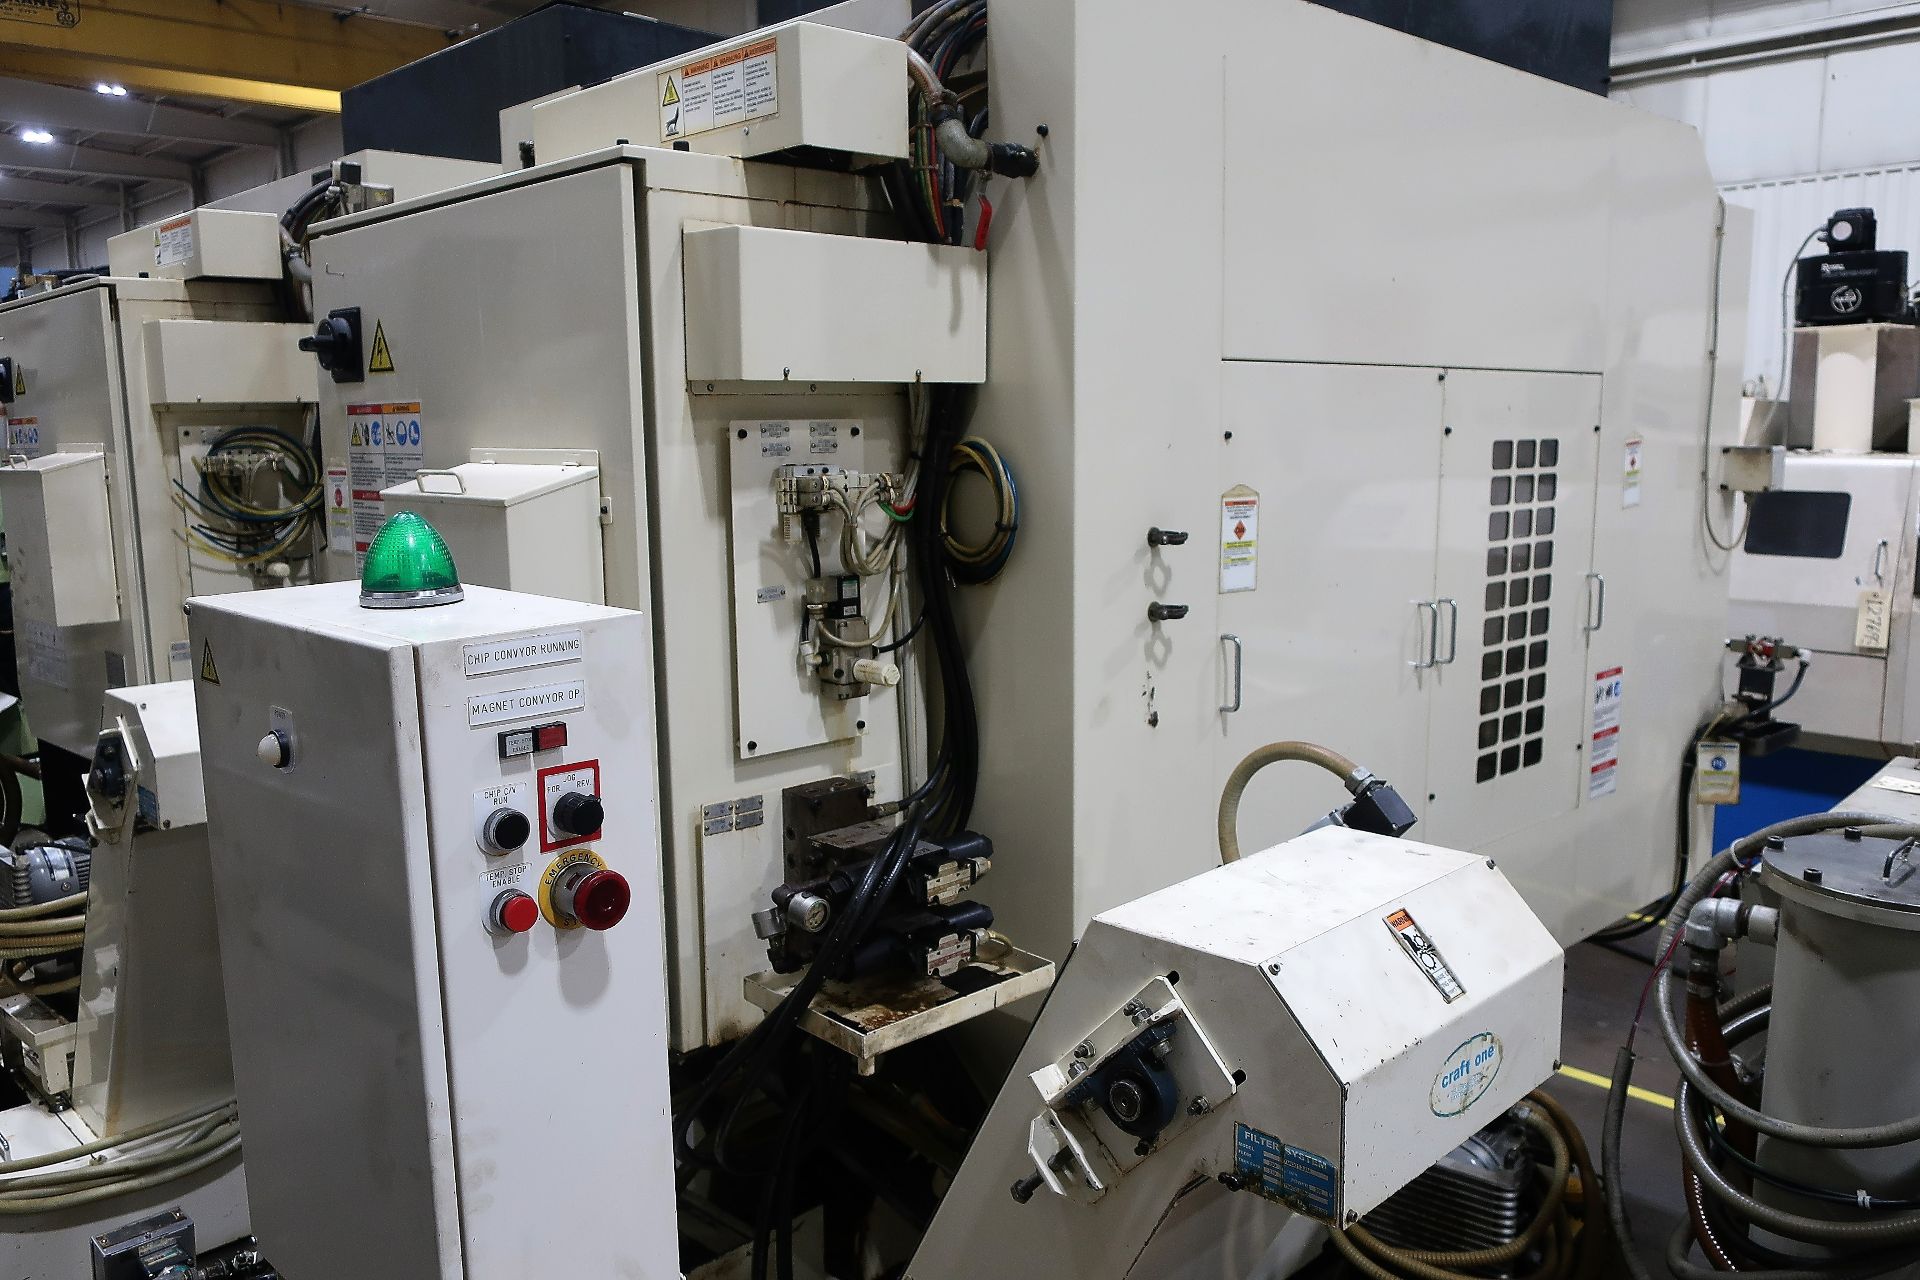 BROTHER TC-R2B CNC DRILL TAP VERTICAL MACHINING CENTER, S/N 111879, NEW 2012 - Image 6 of 9